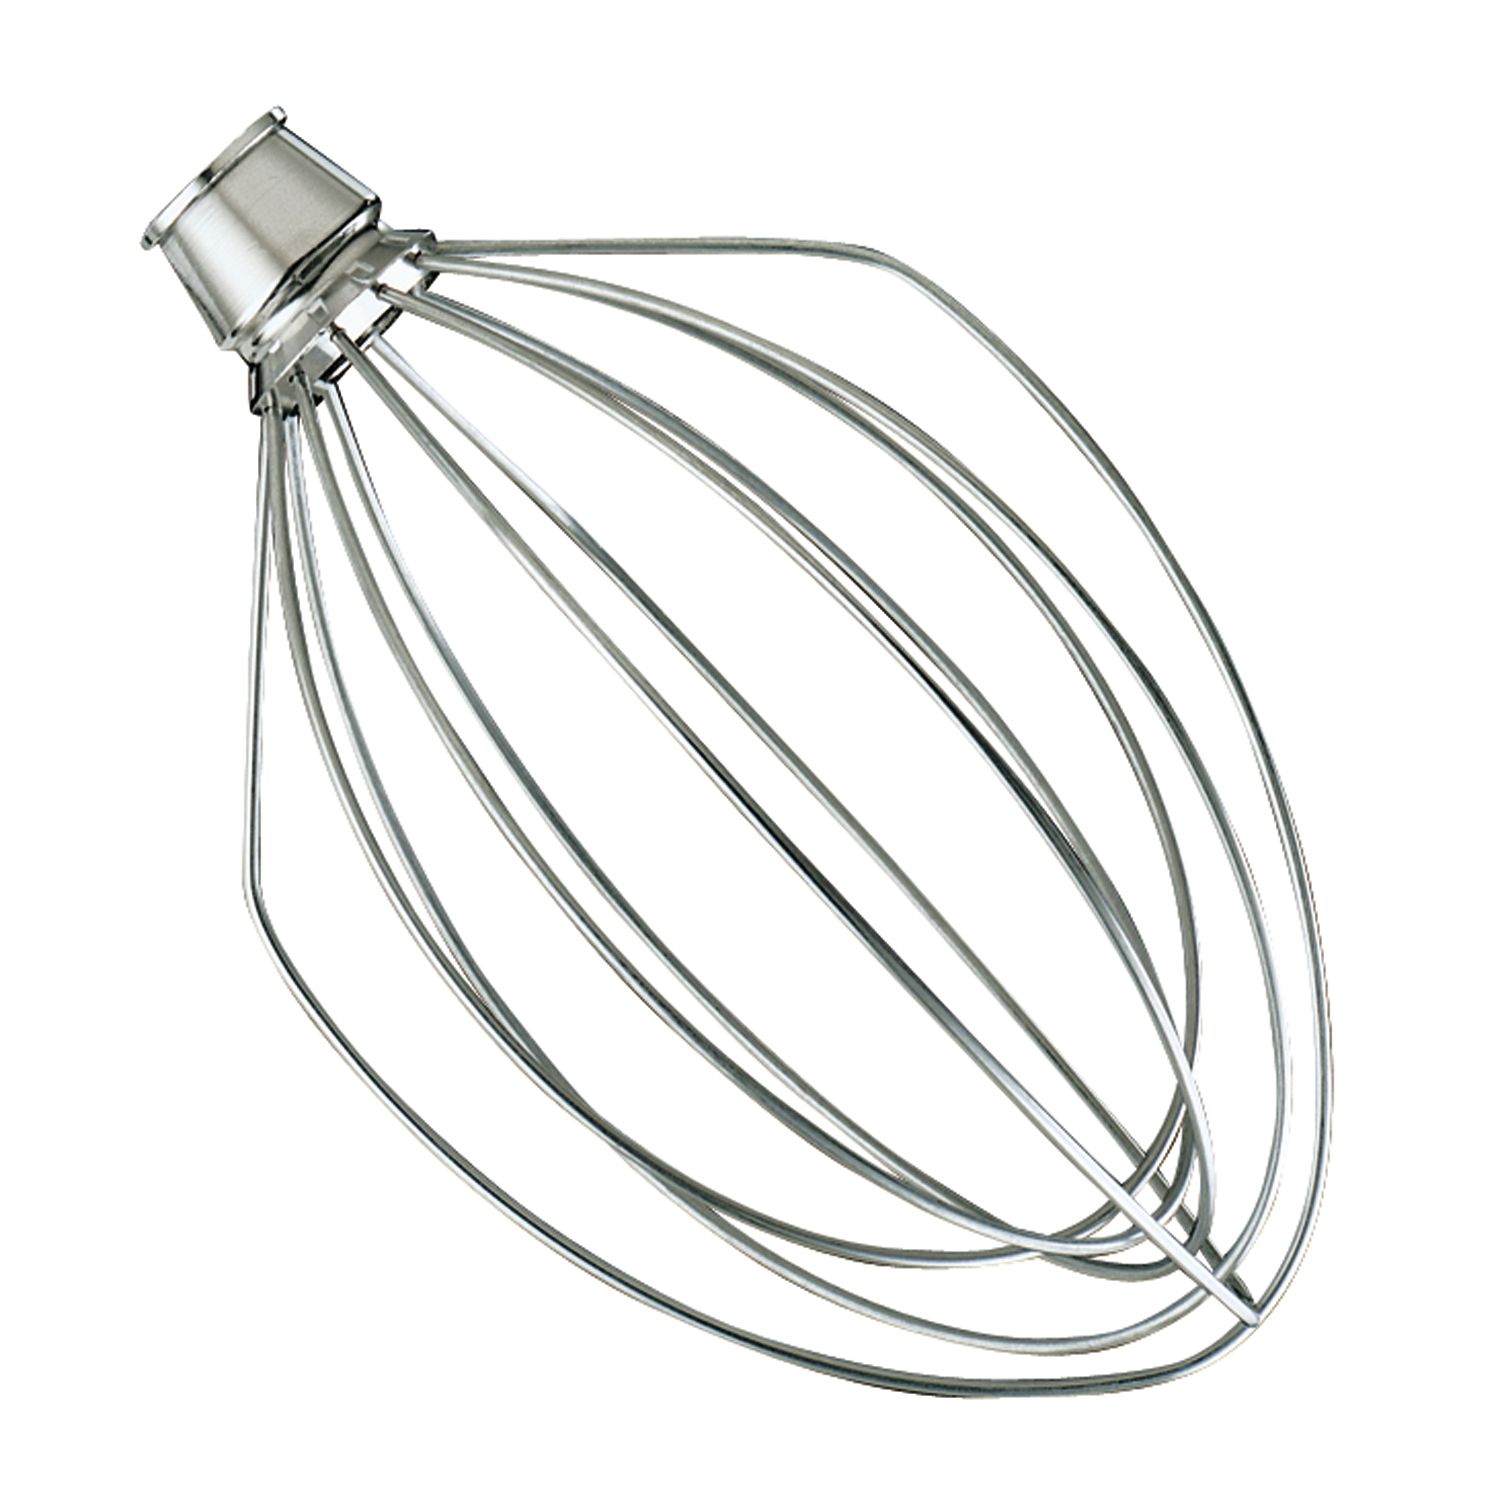 Mixer with Whisk Attachment